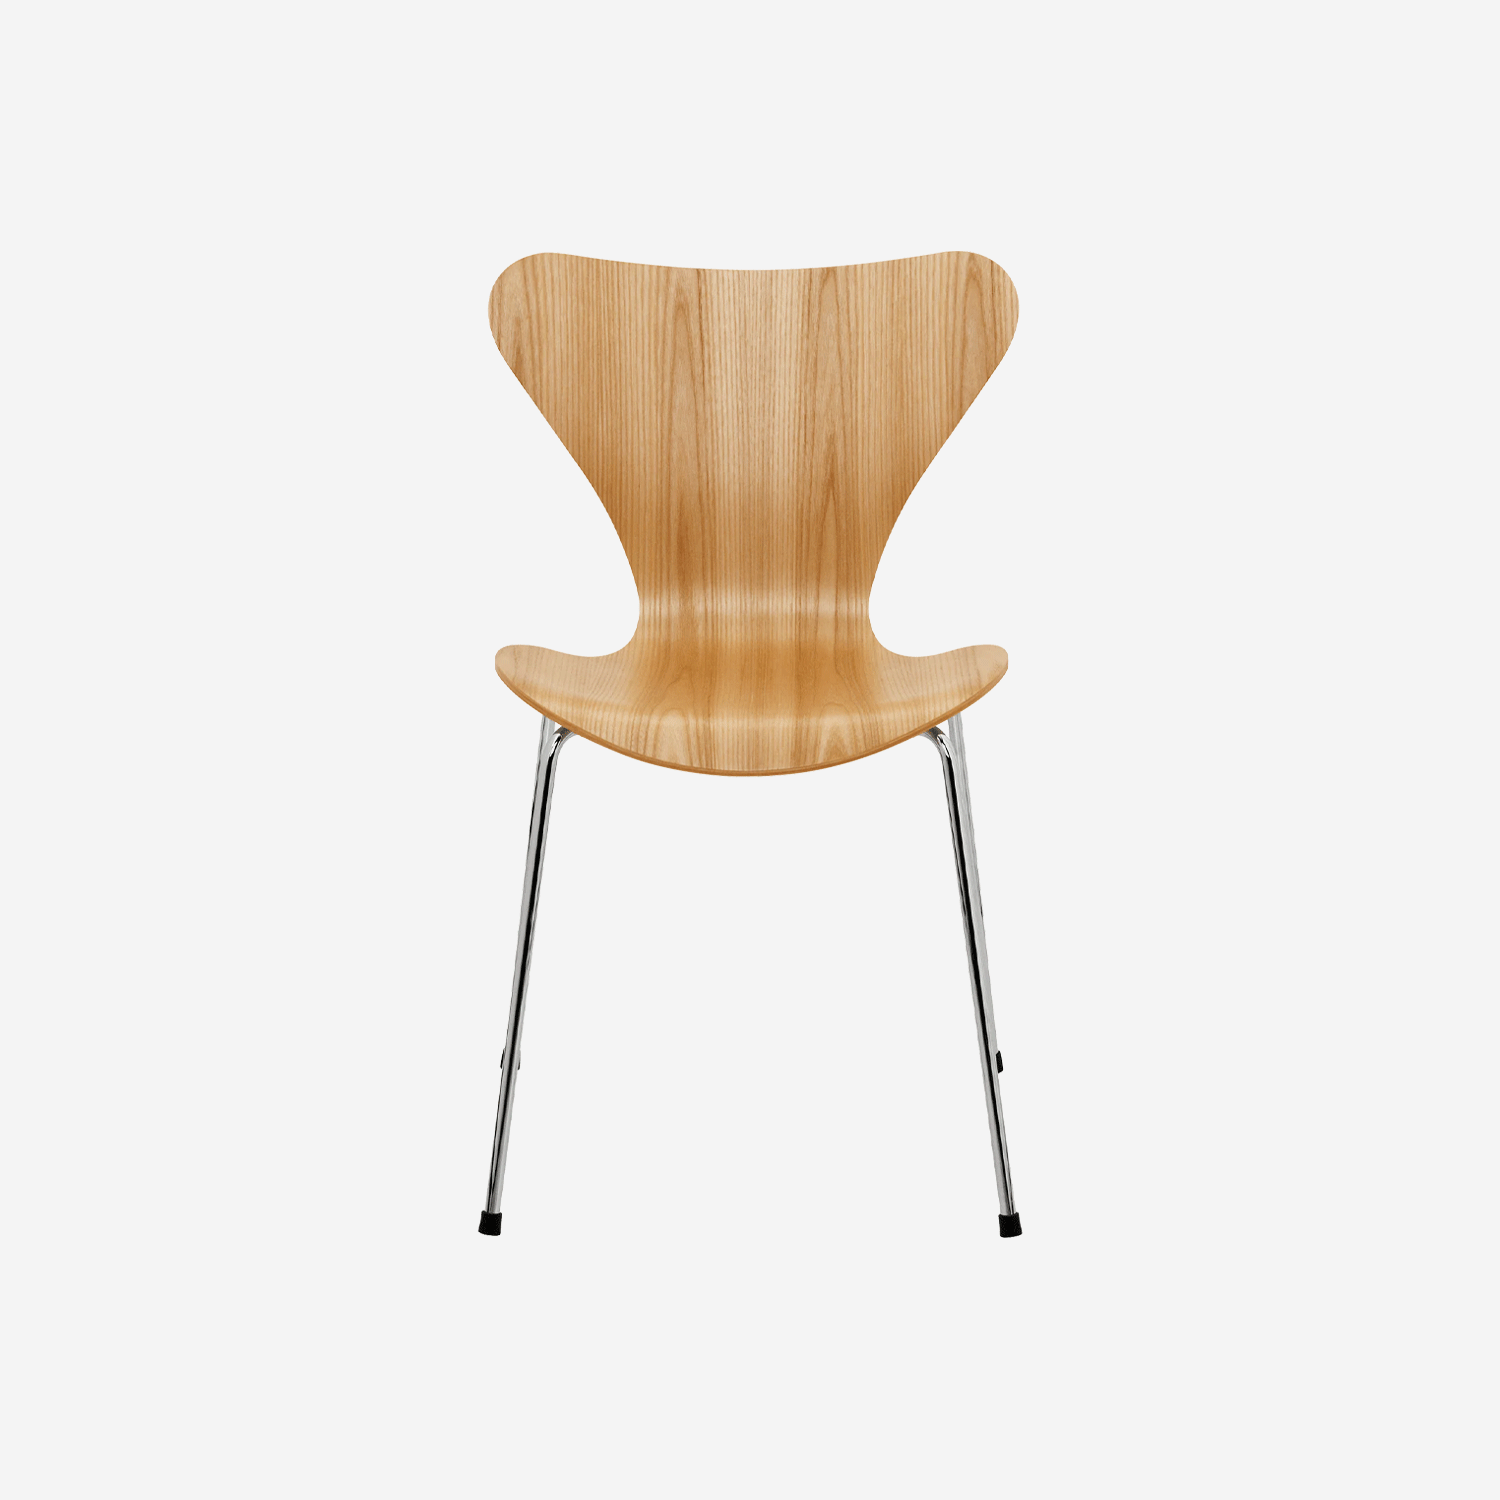 Series 7 chair 3107, lacquered veneer